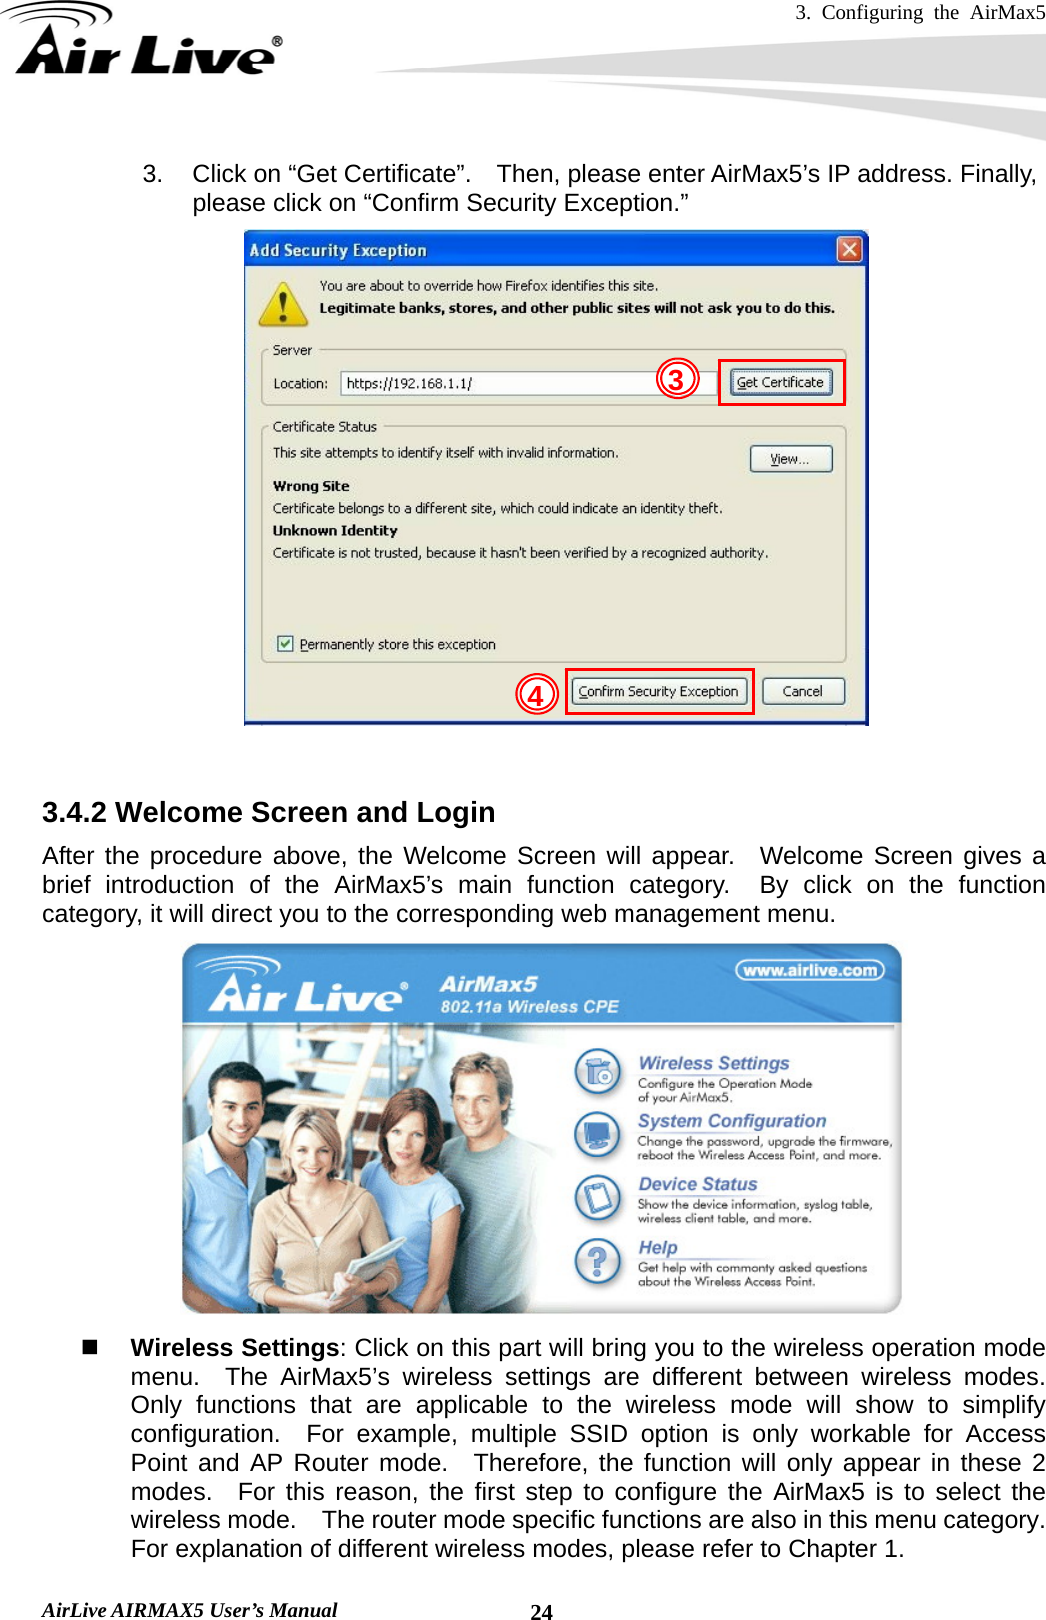 3. Configuring the AirMax5   AirLive AIRMAX5 User’s Manual  243.  Click on “Get Certificate”.    Then, please enter AirMax5’s IP address. Finally, please click on “Confirm Security Exception.”    3.4.2 Welcome Screen and Login After the procedure above, the Welcome Screen will appear.  Welcome Screen gives a brief introduction of the AirMax5’s main function category.  By click on the function category, it will direct you to the corresponding web management menu.   Wireless Settings: Click on this part will bring you to the wireless operation mode menu.  The AirMax5’s wireless settings are different between wireless modes.  Only functions that are applicable to the wireless mode will show to simplify configuration.  For example, multiple SSID option is only workable for Access Point and AP Router mode.  Therefore, the function will only appear in these 2 modes.  For this reason, the first step to configure the AirMax5 is to select the wireless mode.  The router mode specific functions are also in this menu category.   For explanation of different wireless modes, please refer to Chapter 1. 43